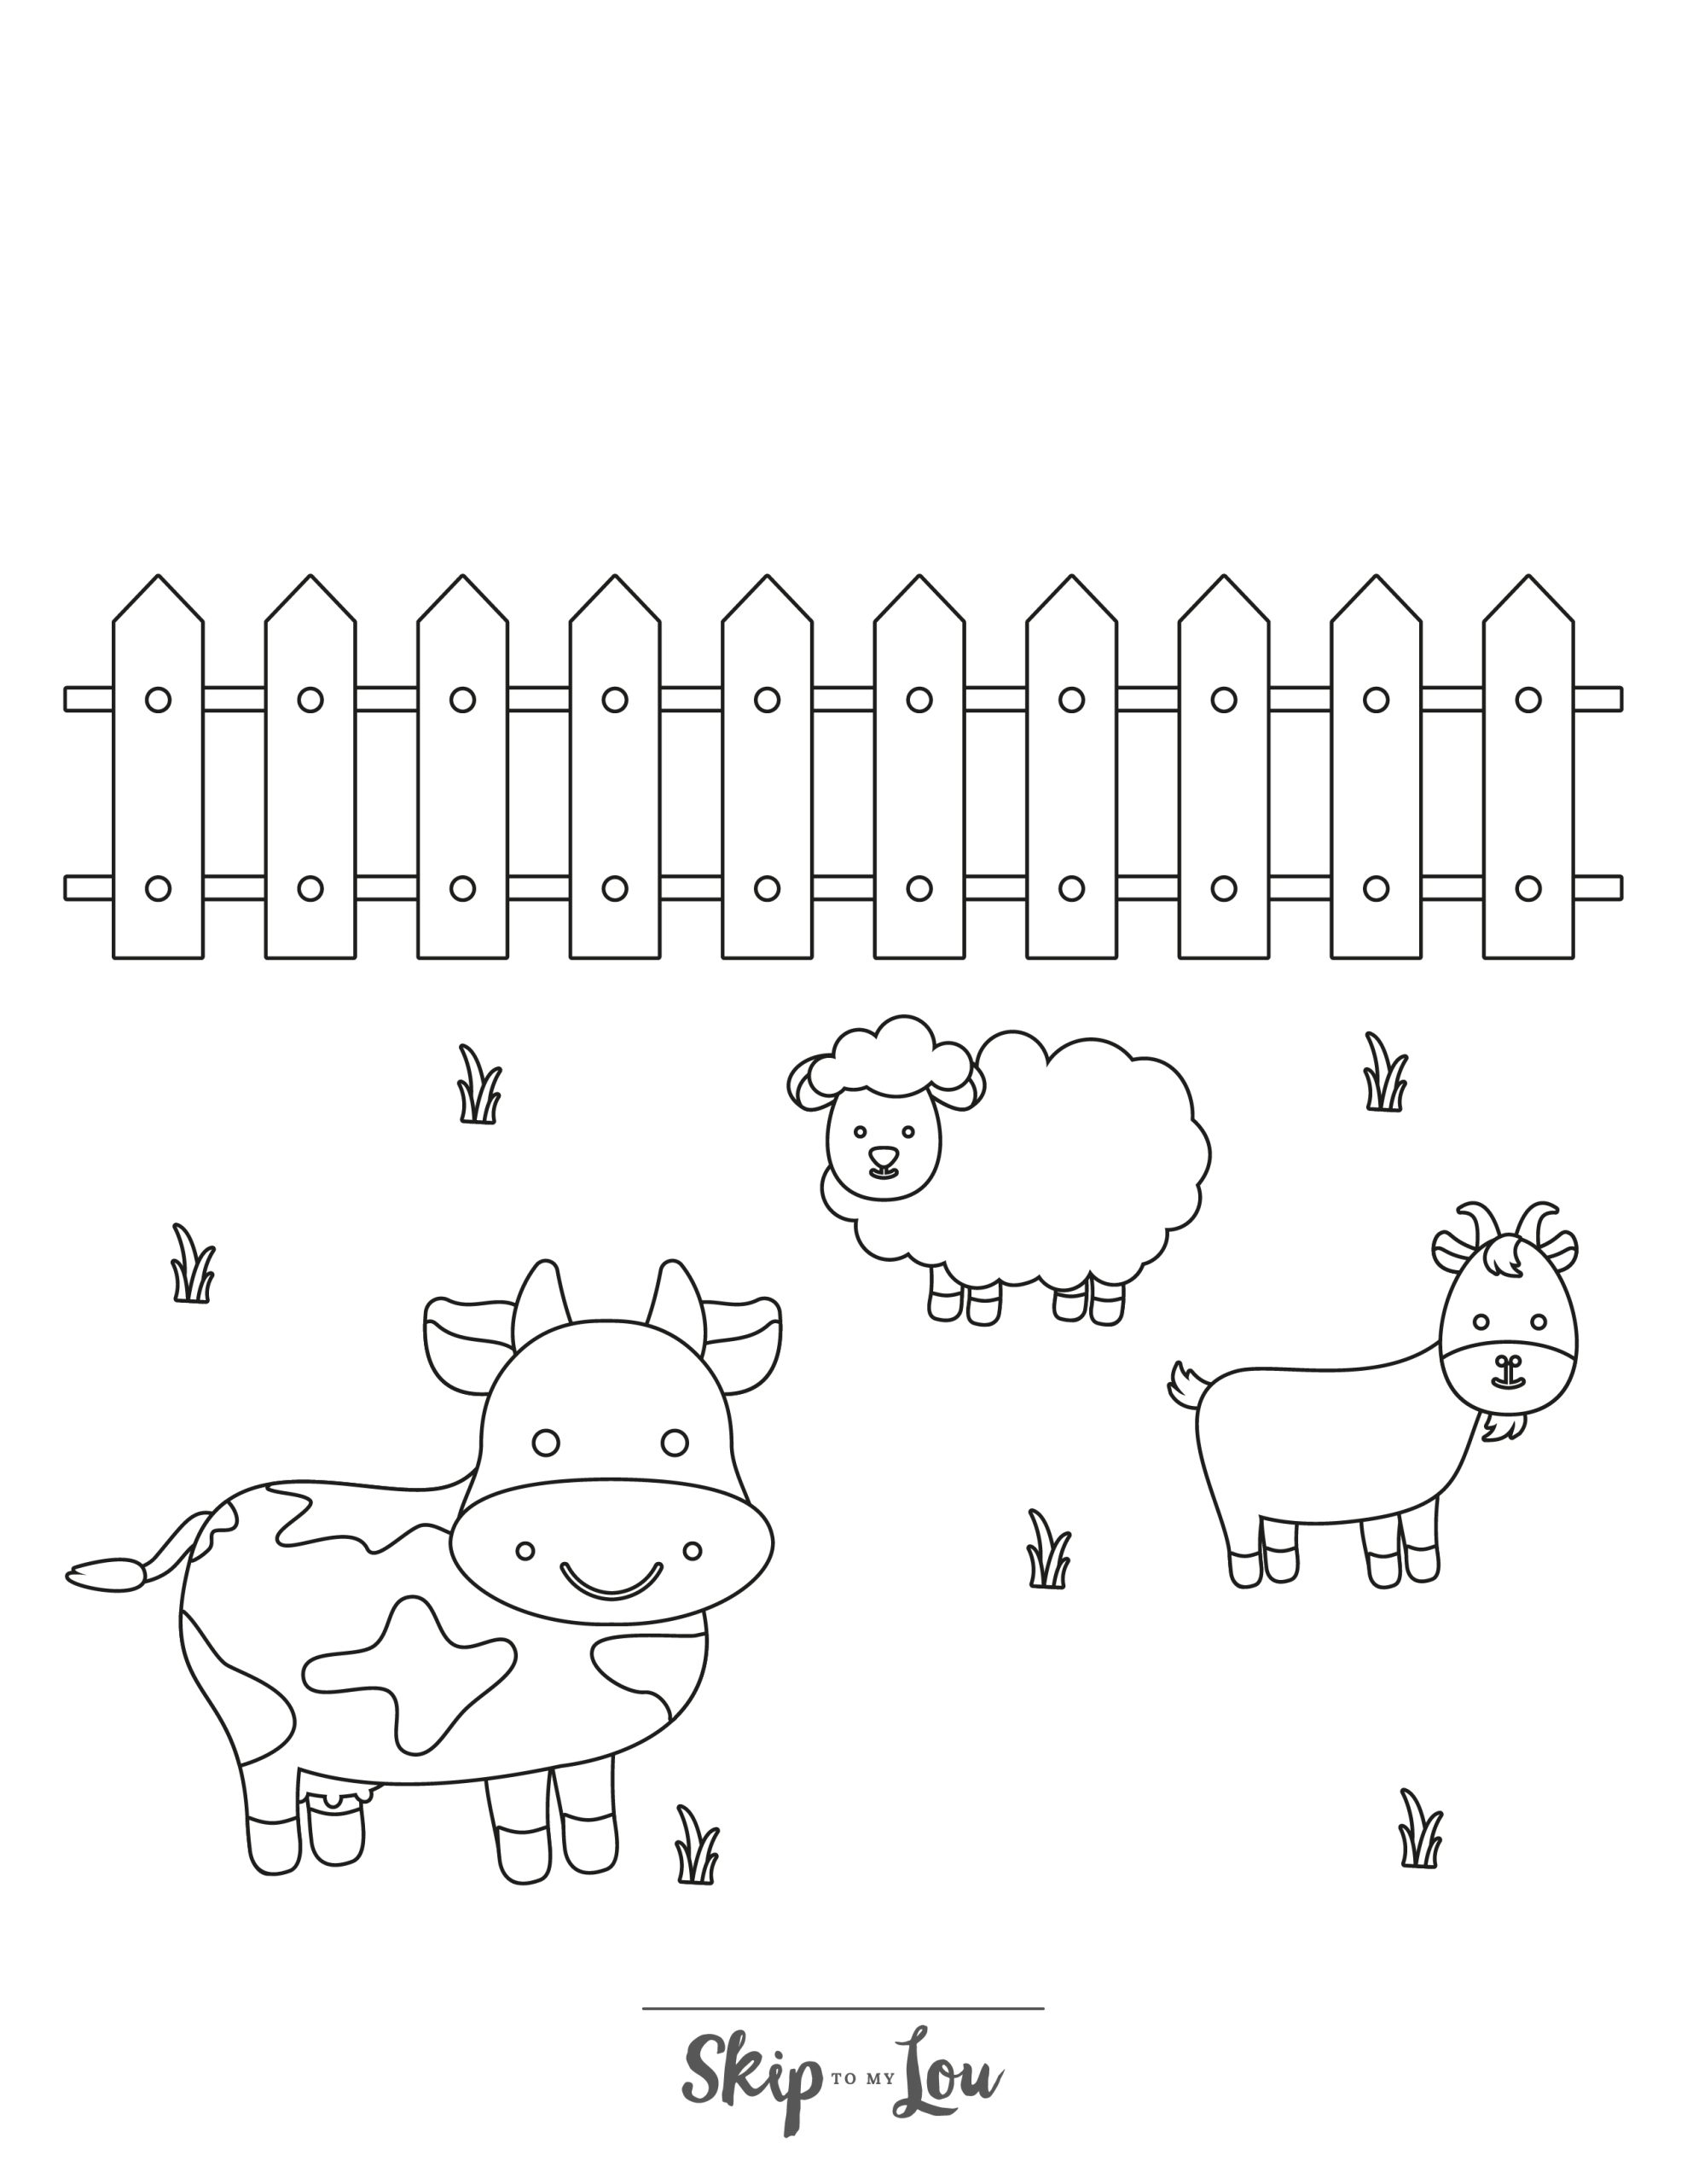 Farm Coloring Page 6 - A line drawing of a small cow, sheep and goat in a field. A fence is in the background. 